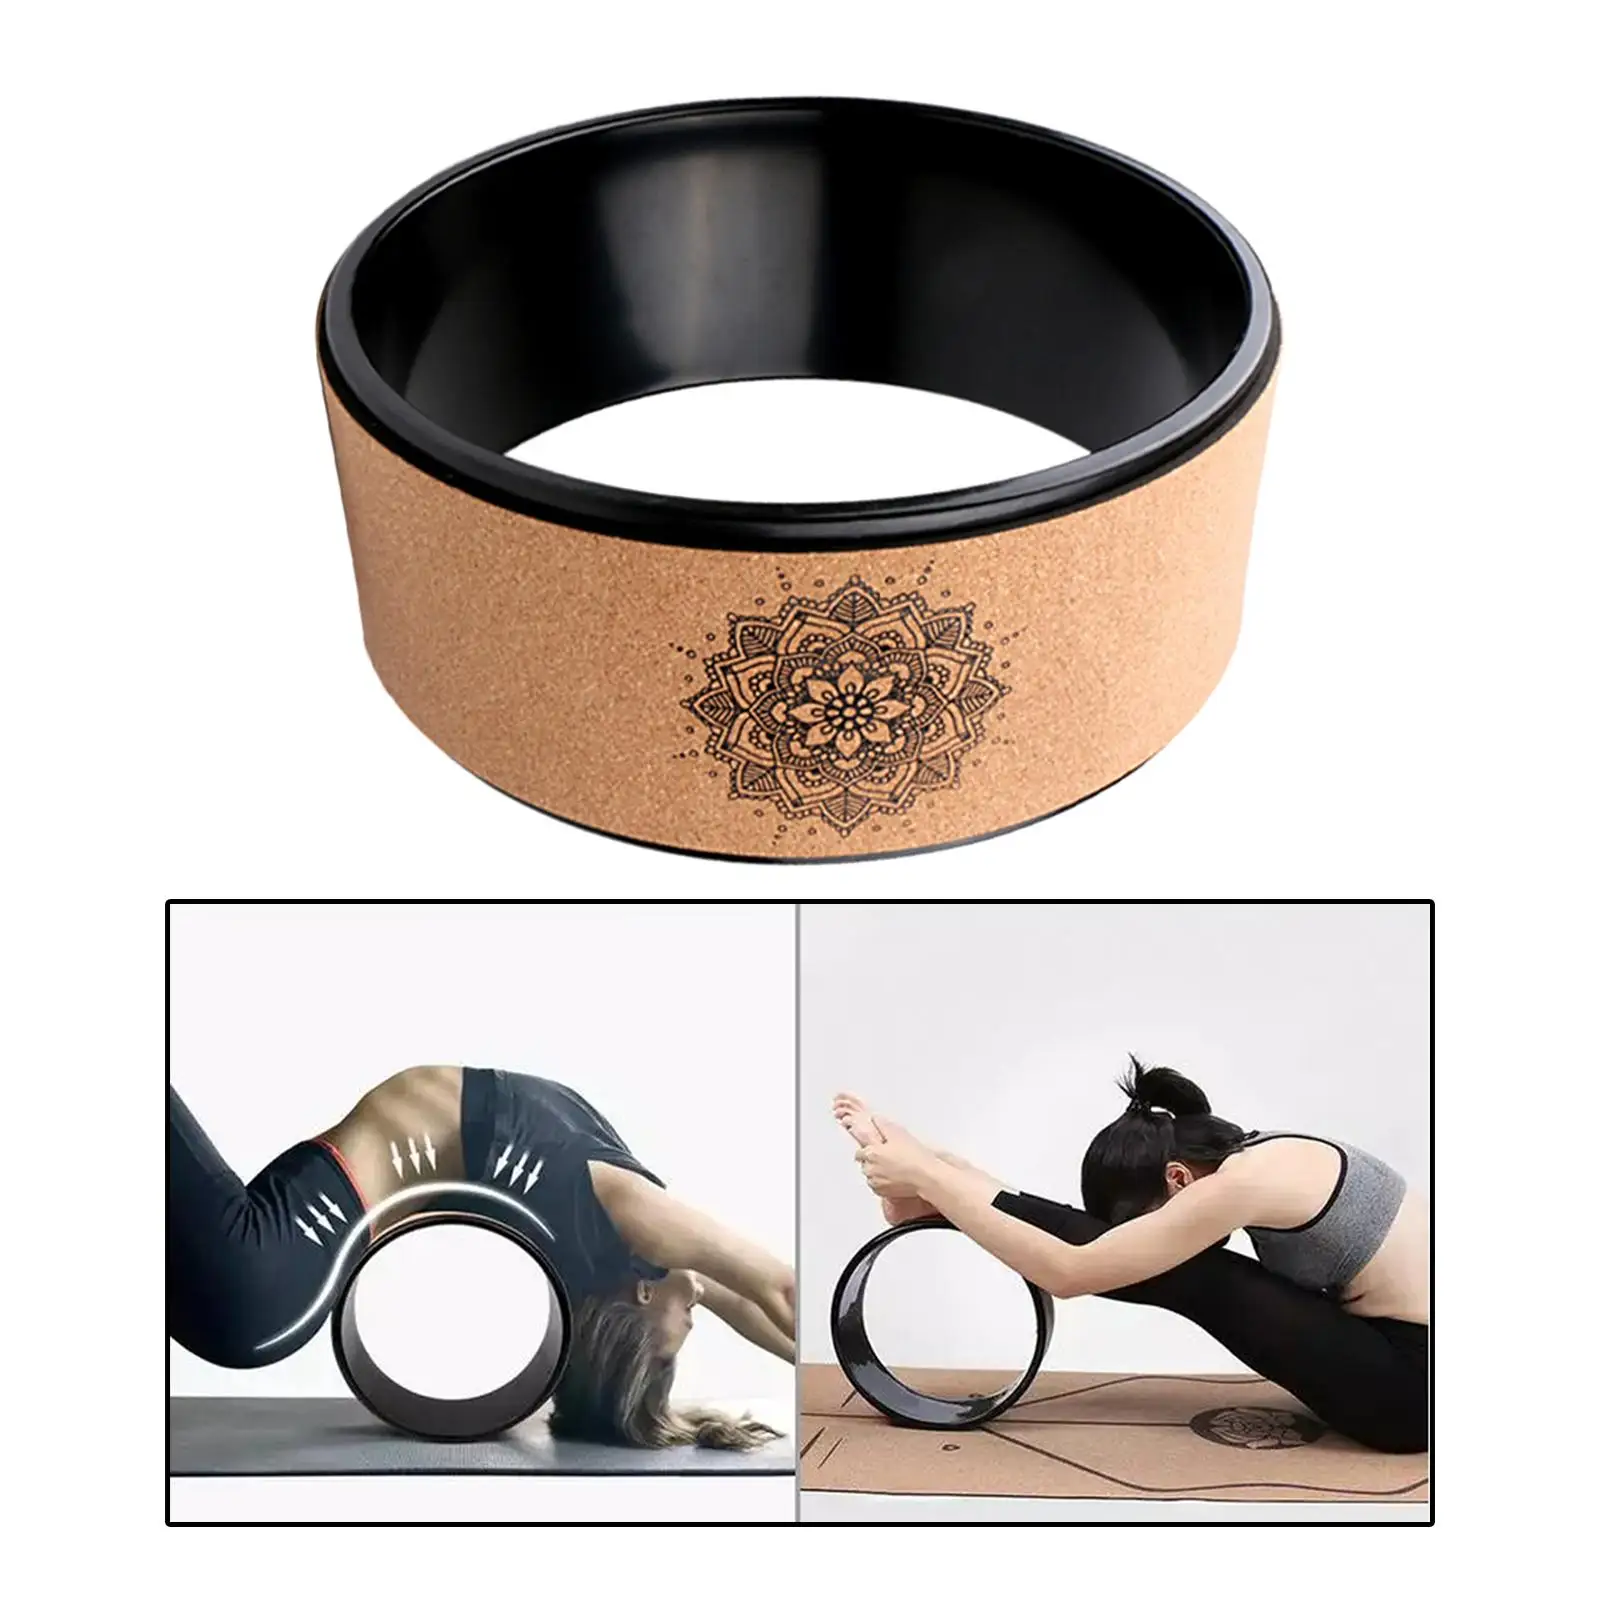 Back Stretcher Relaxation Relieve Flexibility Backbends Sturdy Equipment Yoga Chirp Wheel Yoga Circle Back Wheel for Training 